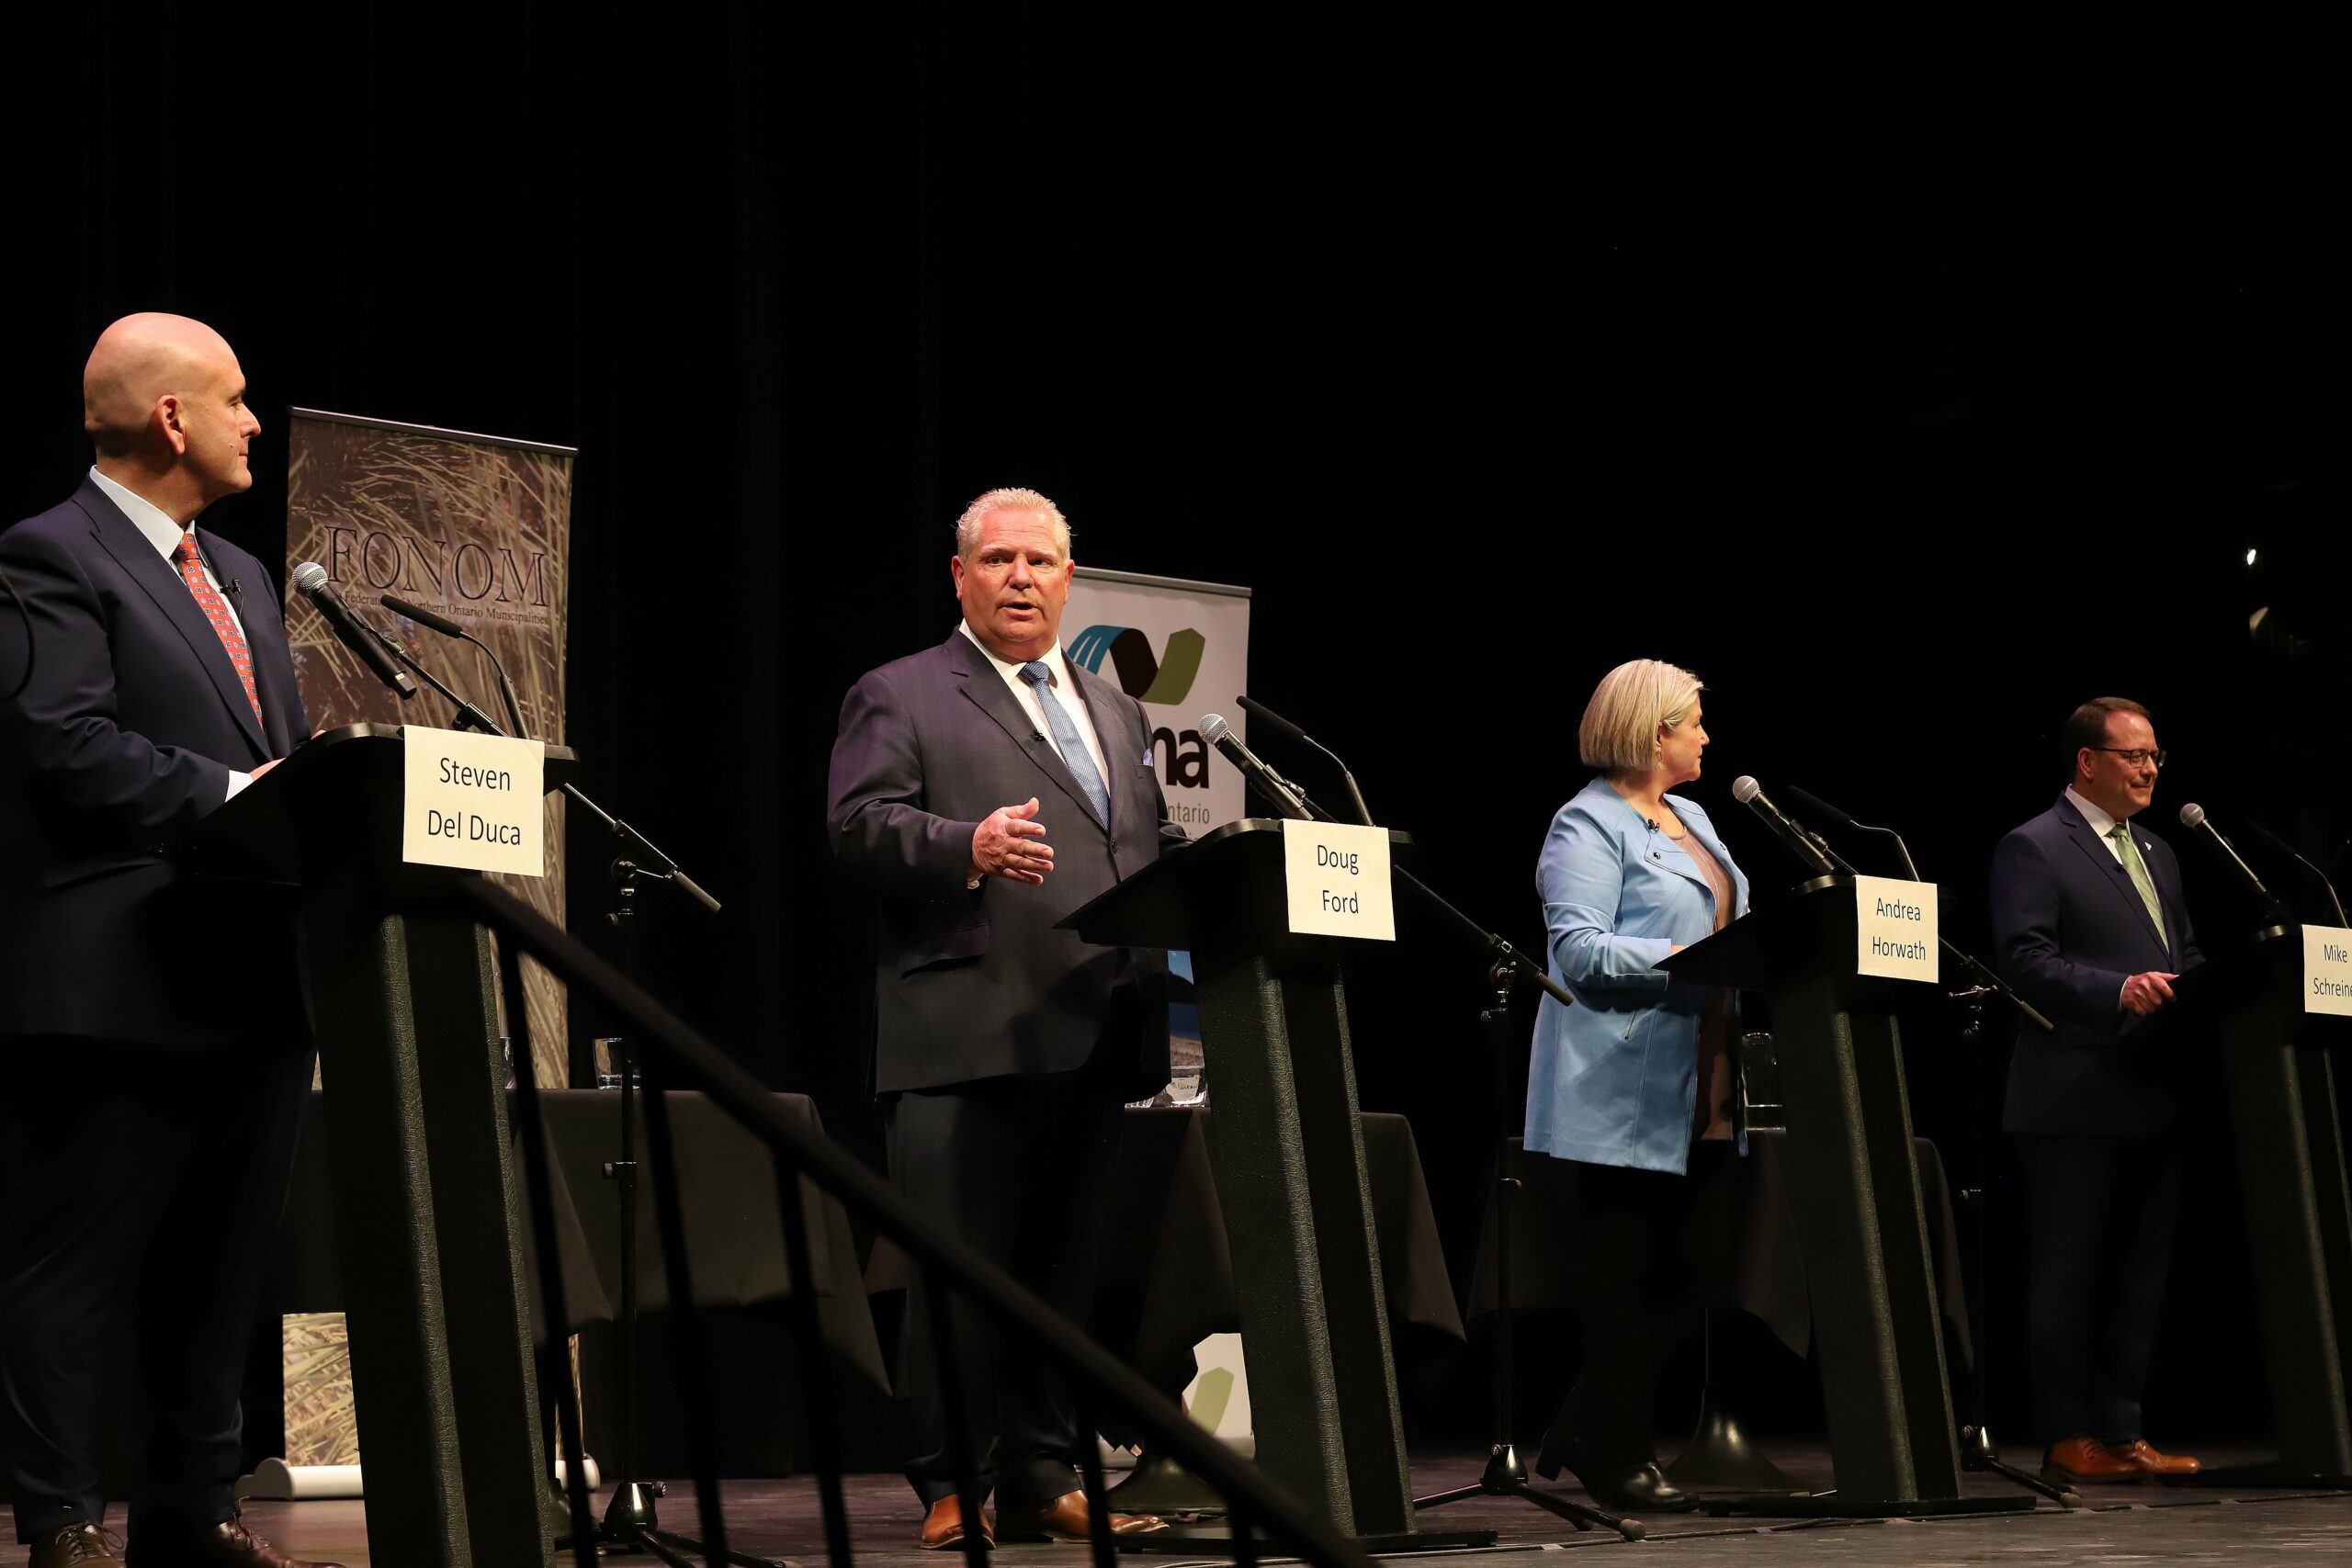 Housing, transport and health care feature in northern debate